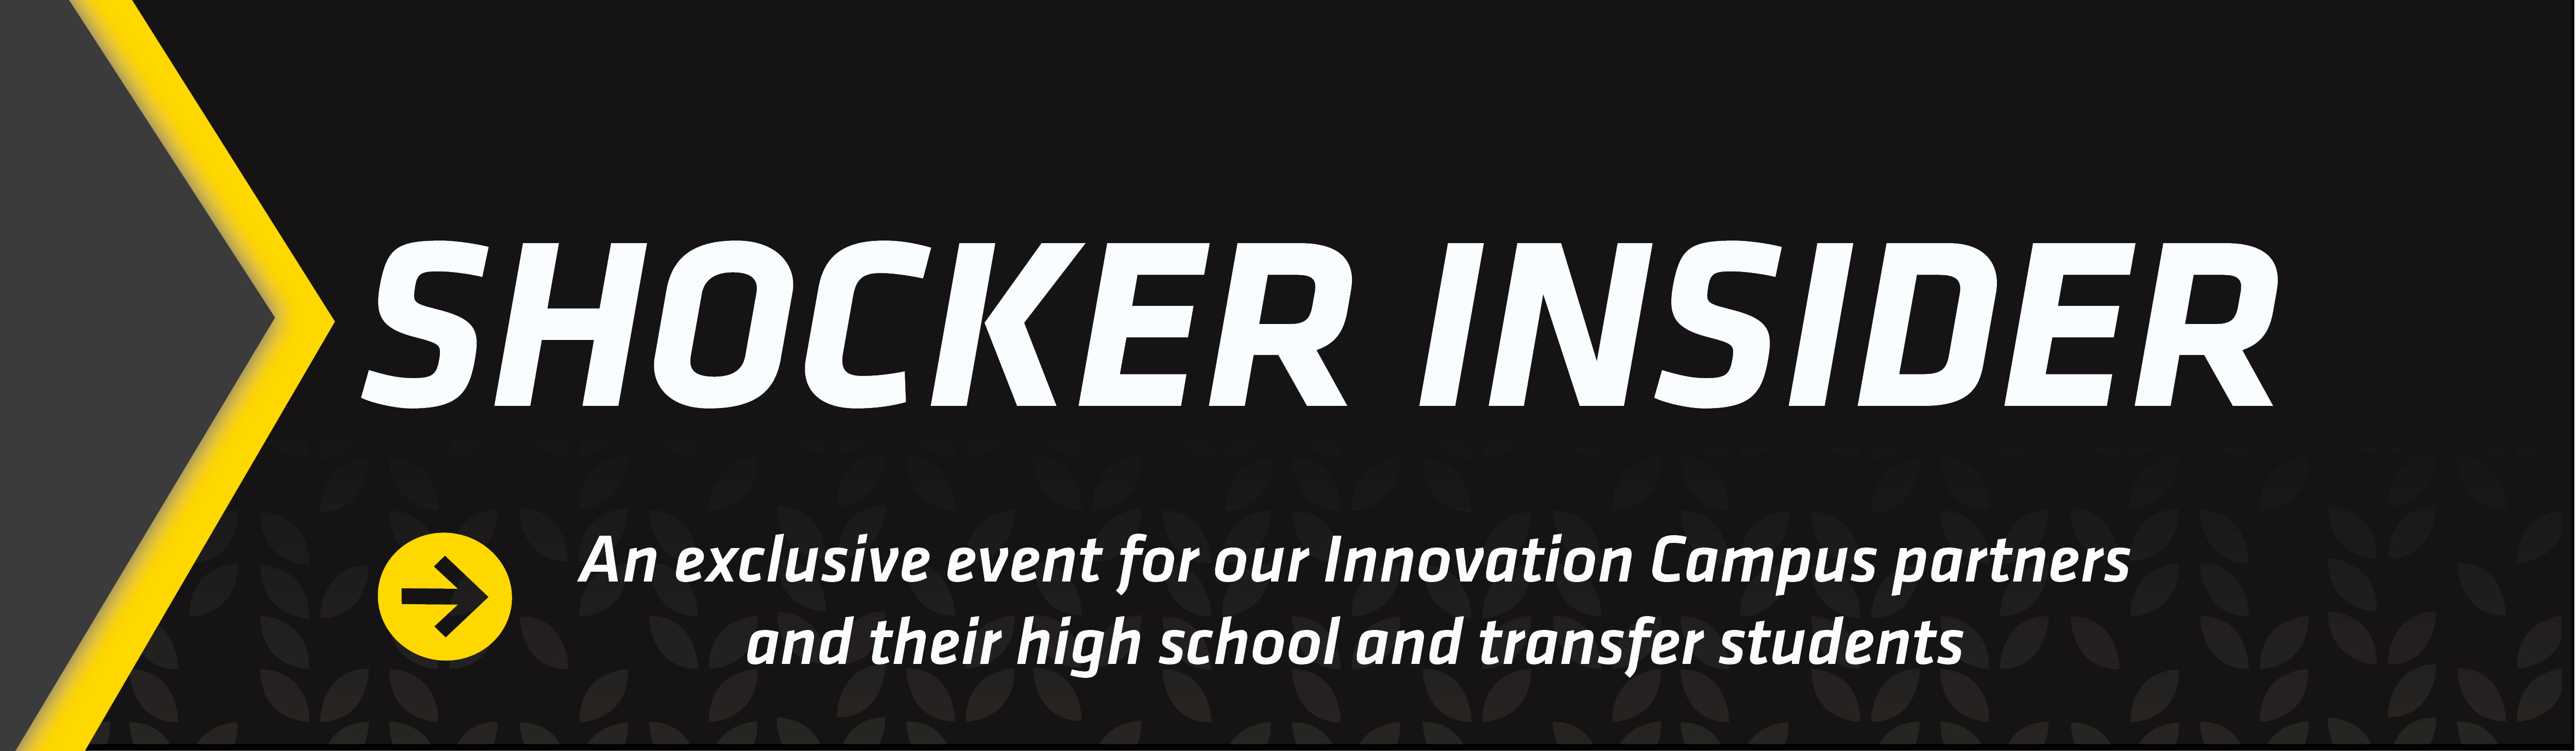 Shocker Insider- An exclusive event for our Innovation Campus partners and their high school and transfer students